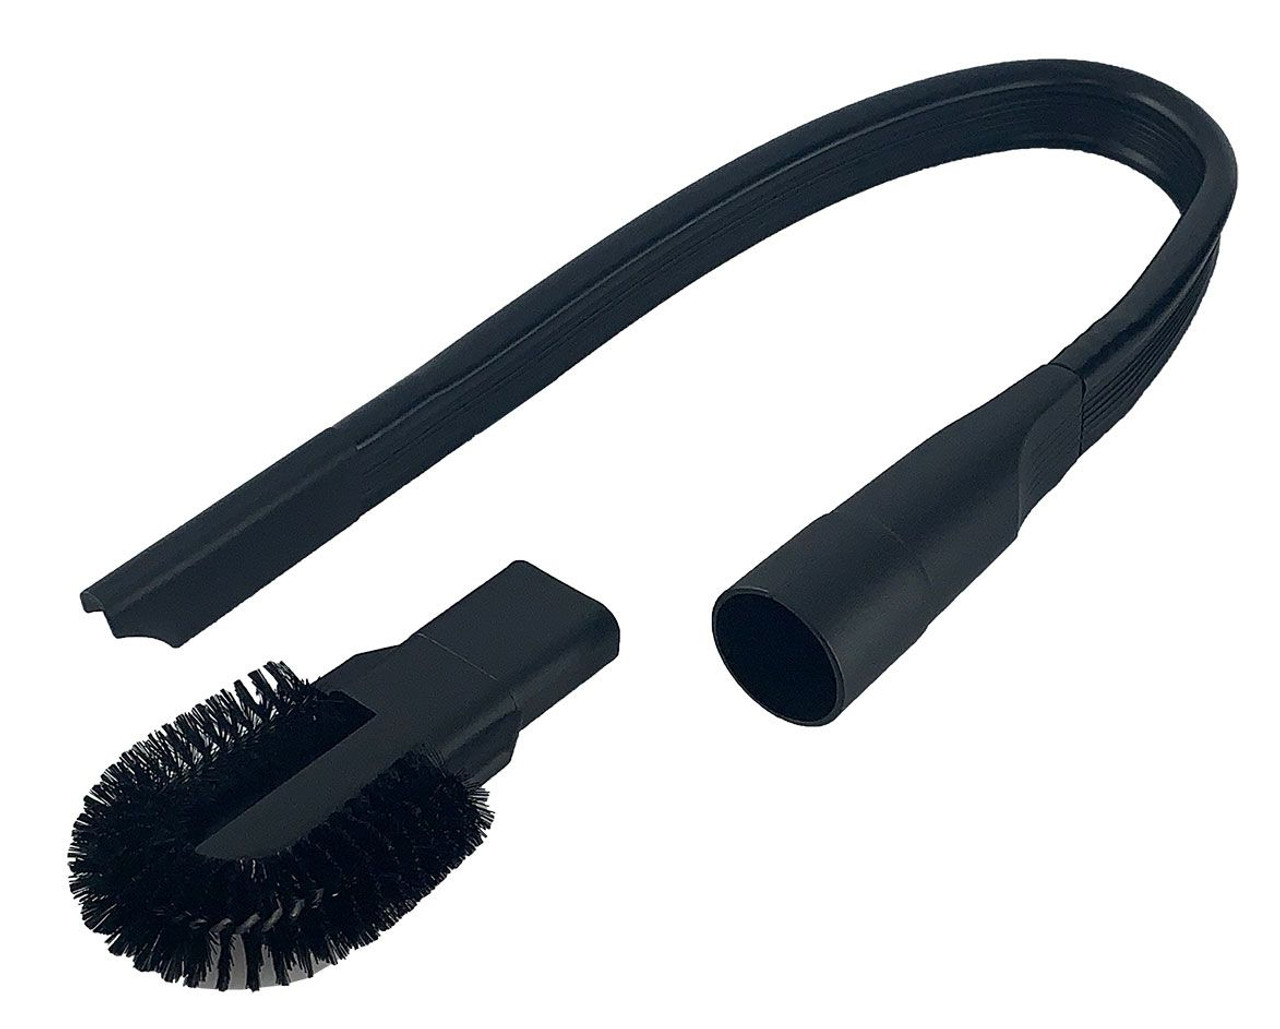 Crevice Tool with Radiator Brush – Manufacturer of VacuMaid Central Vacuum  Systems